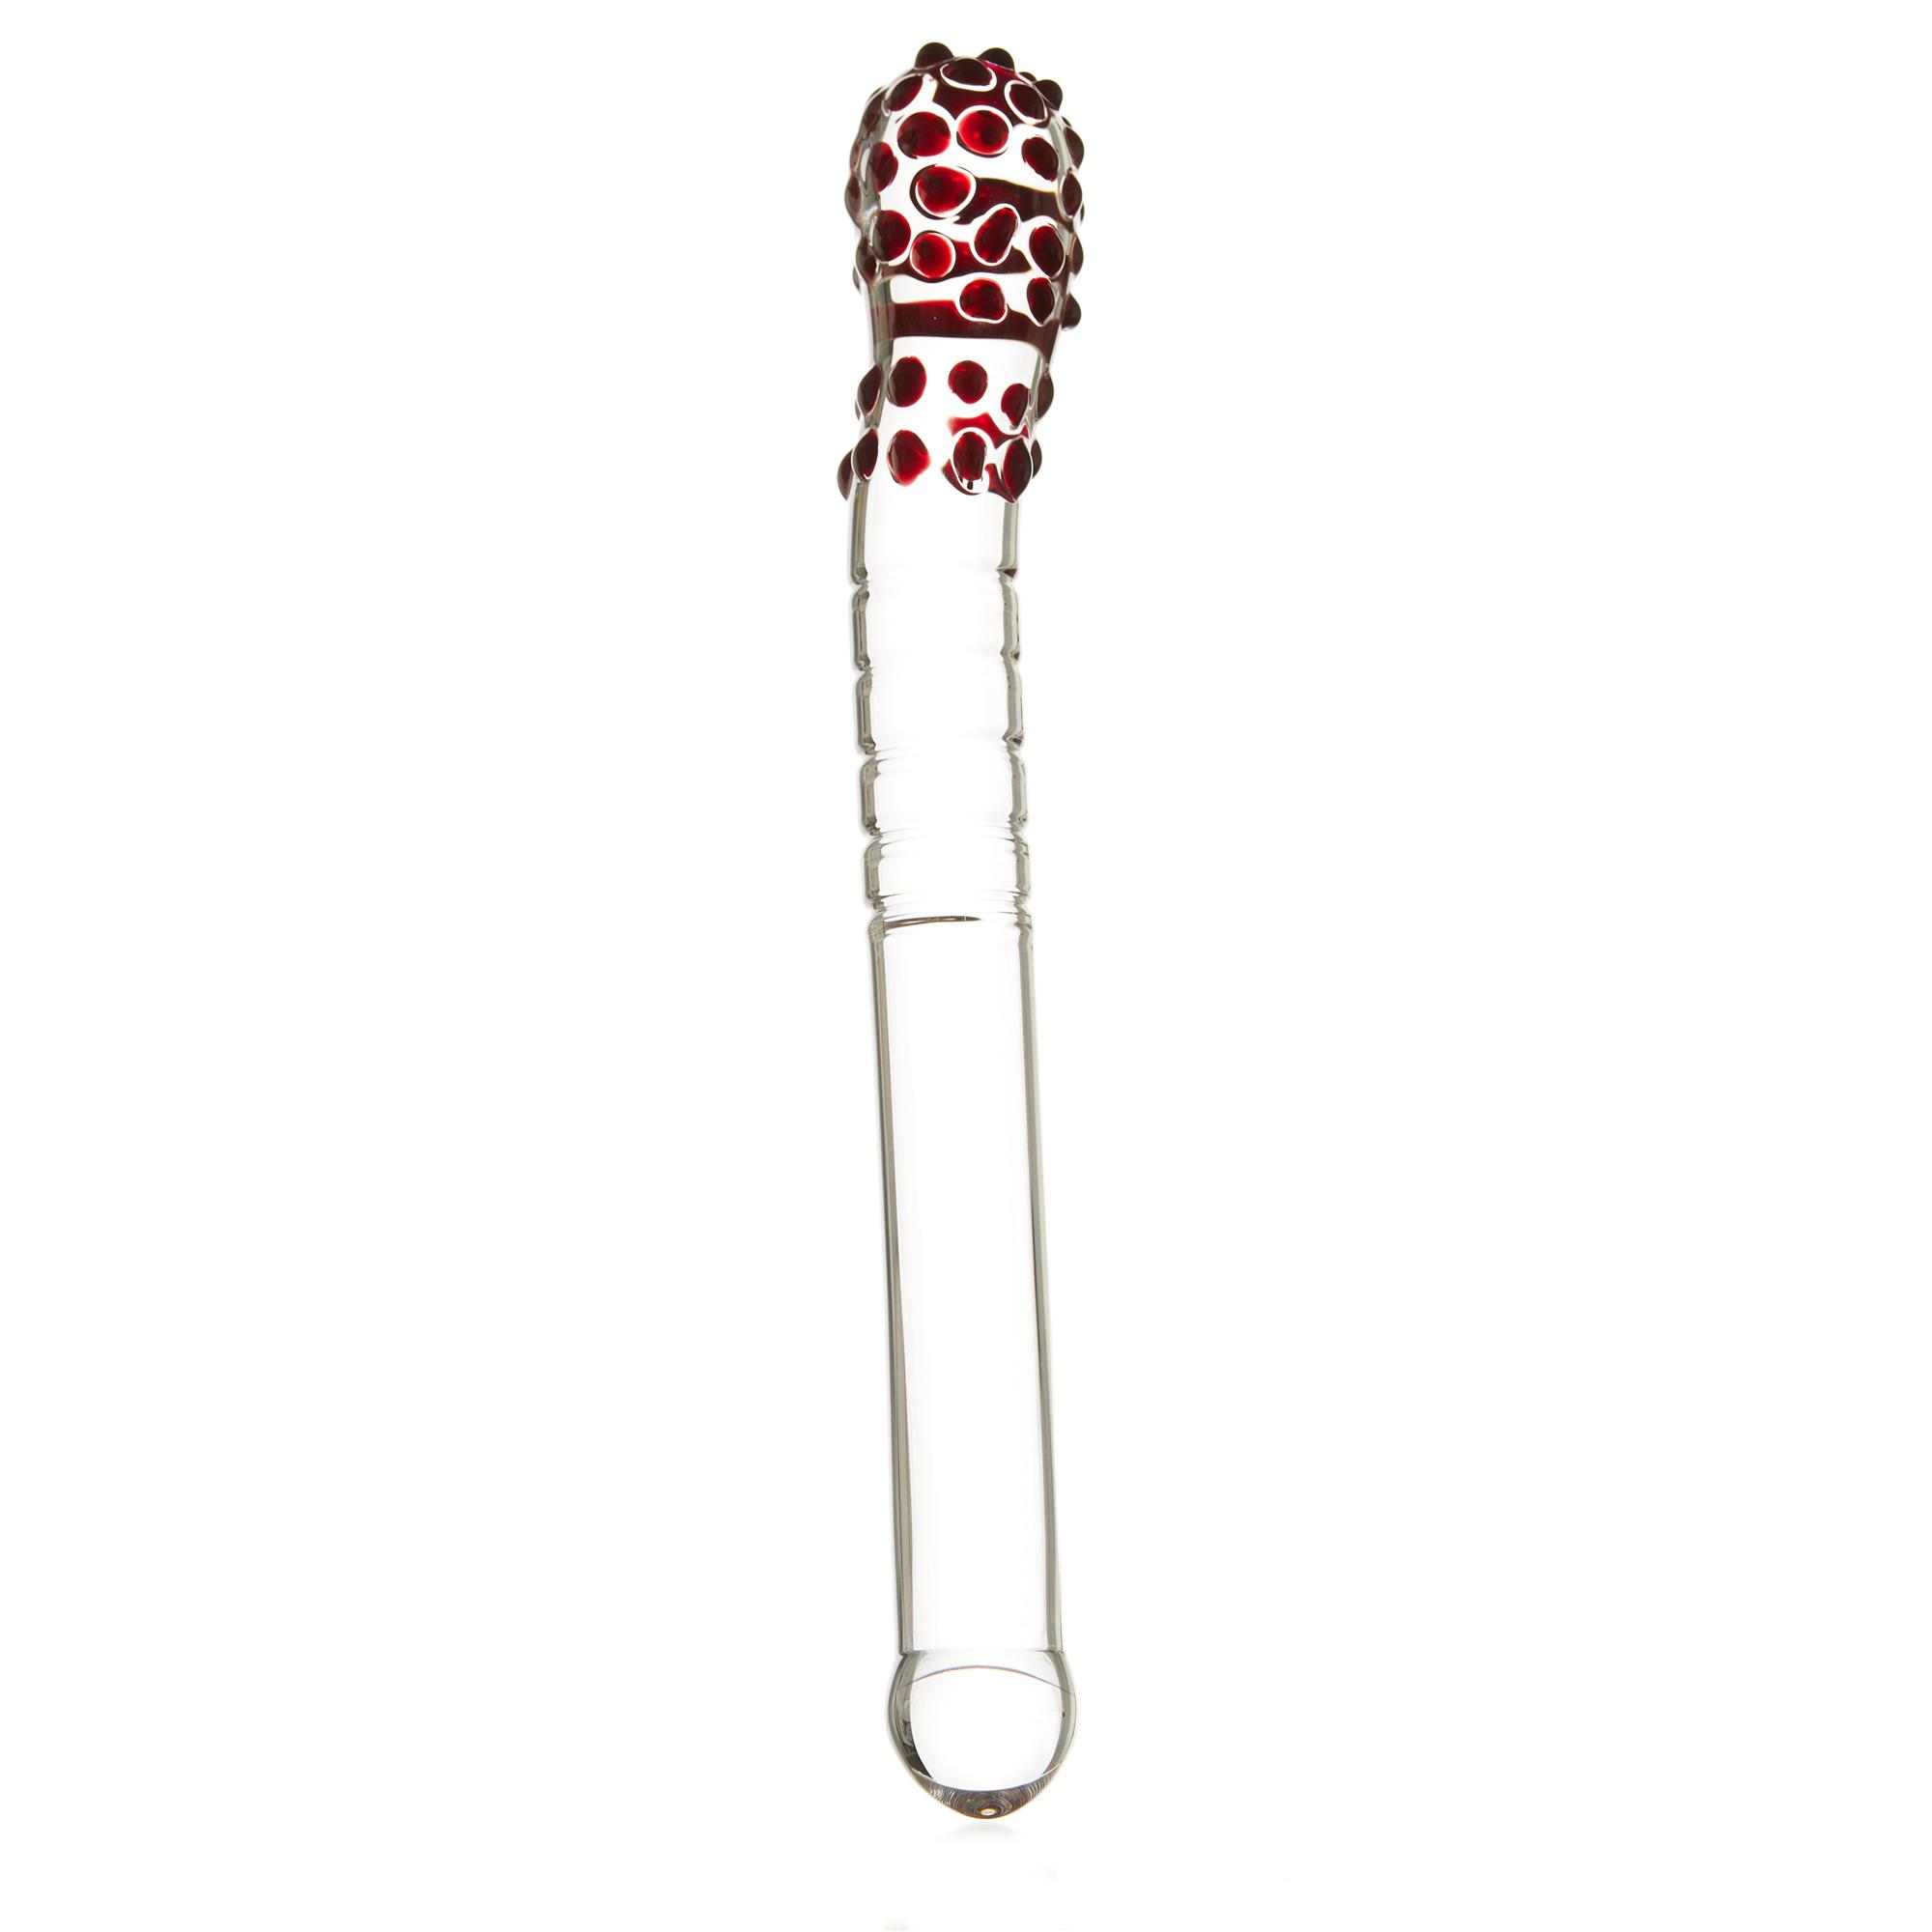 STUDDED PROBE DOUBLE-SIDED GLASS DILDO